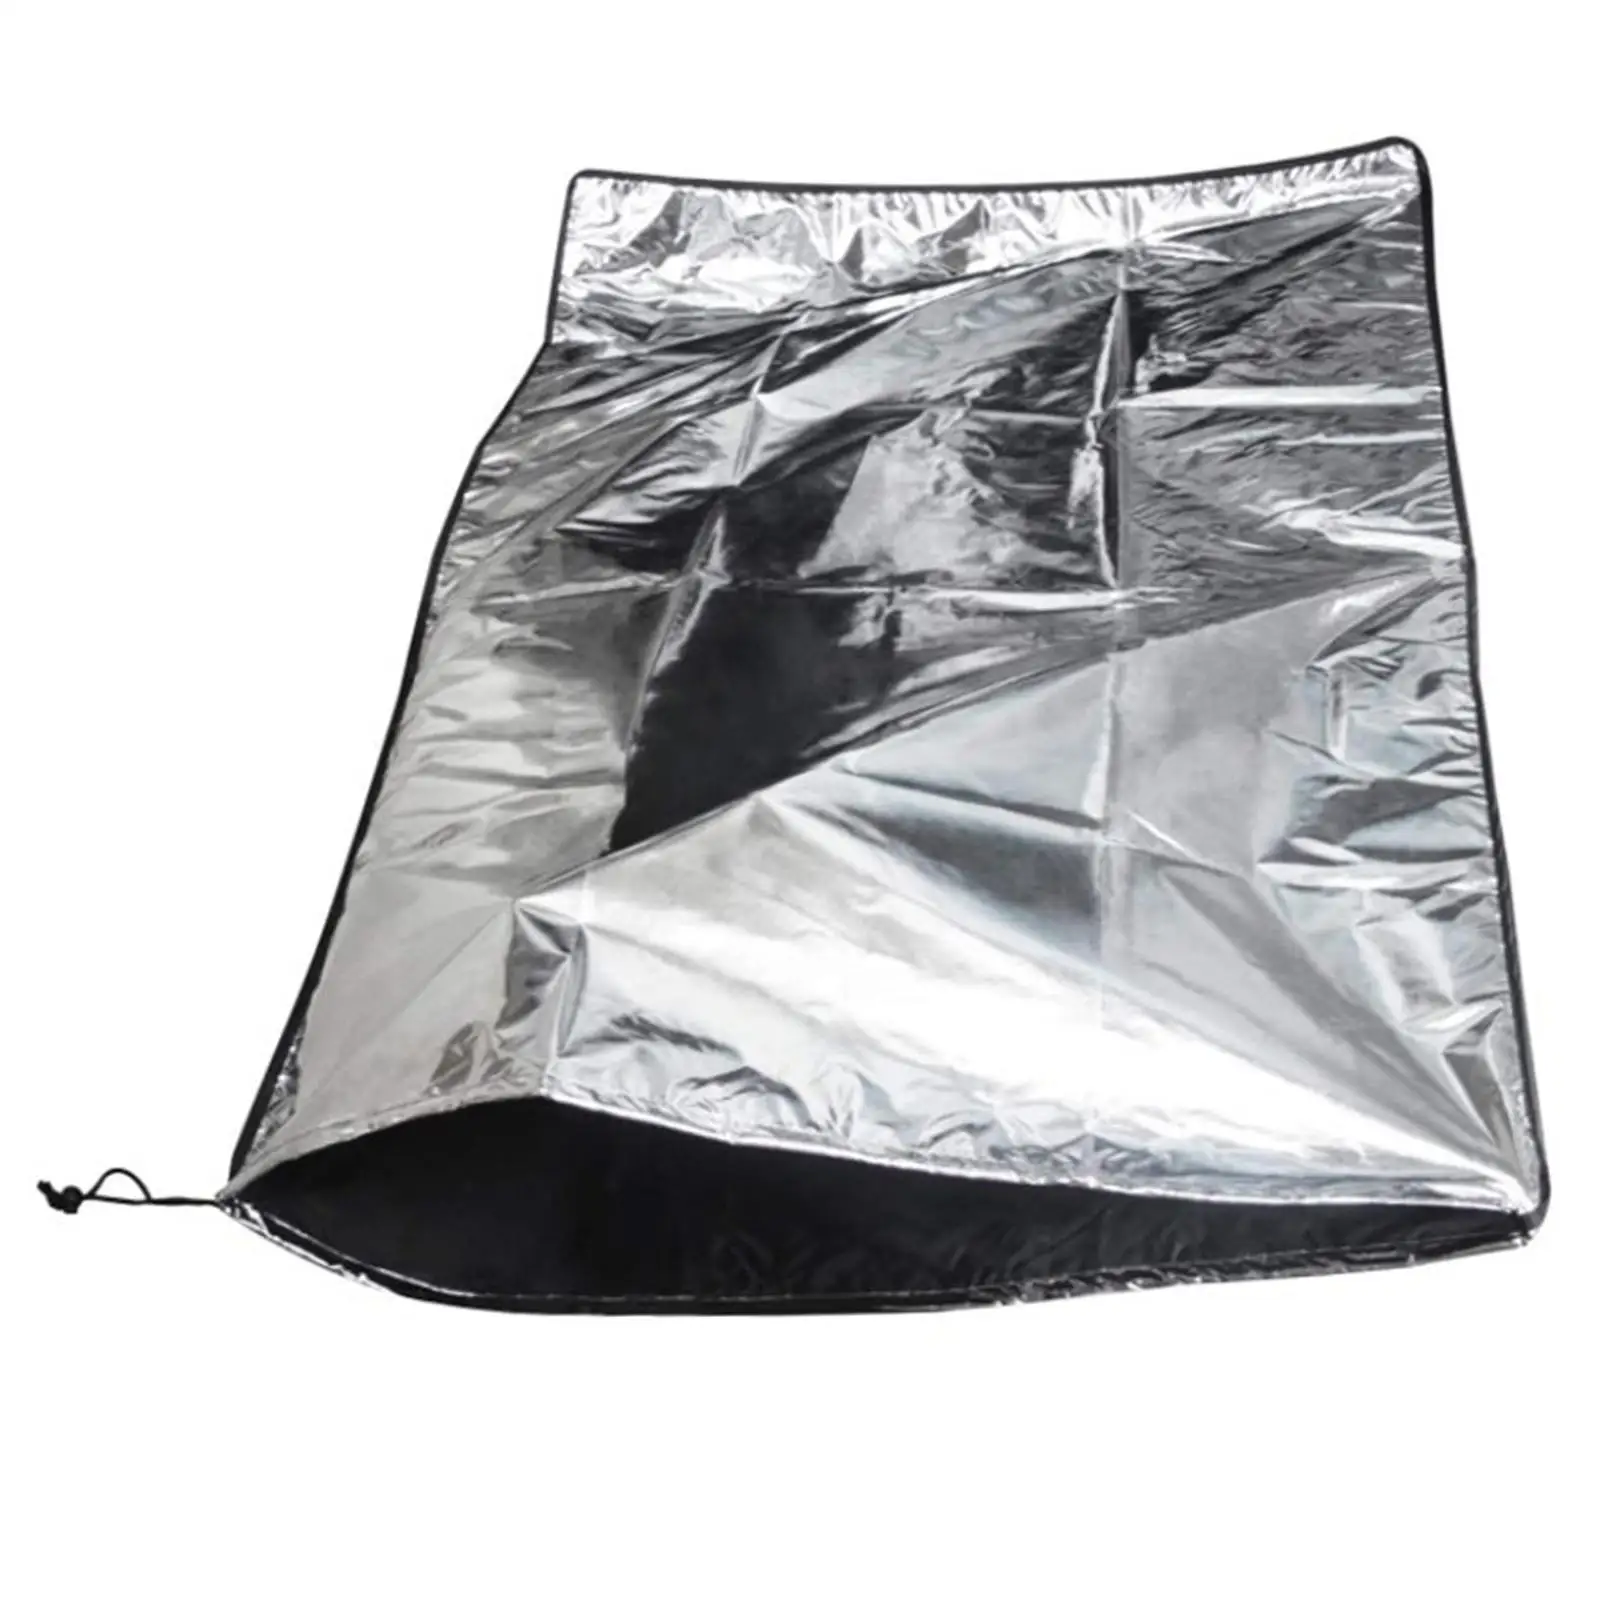 Astronomical Telescope Dust Cover Equipment Easy Using Dustproof for Outdoor